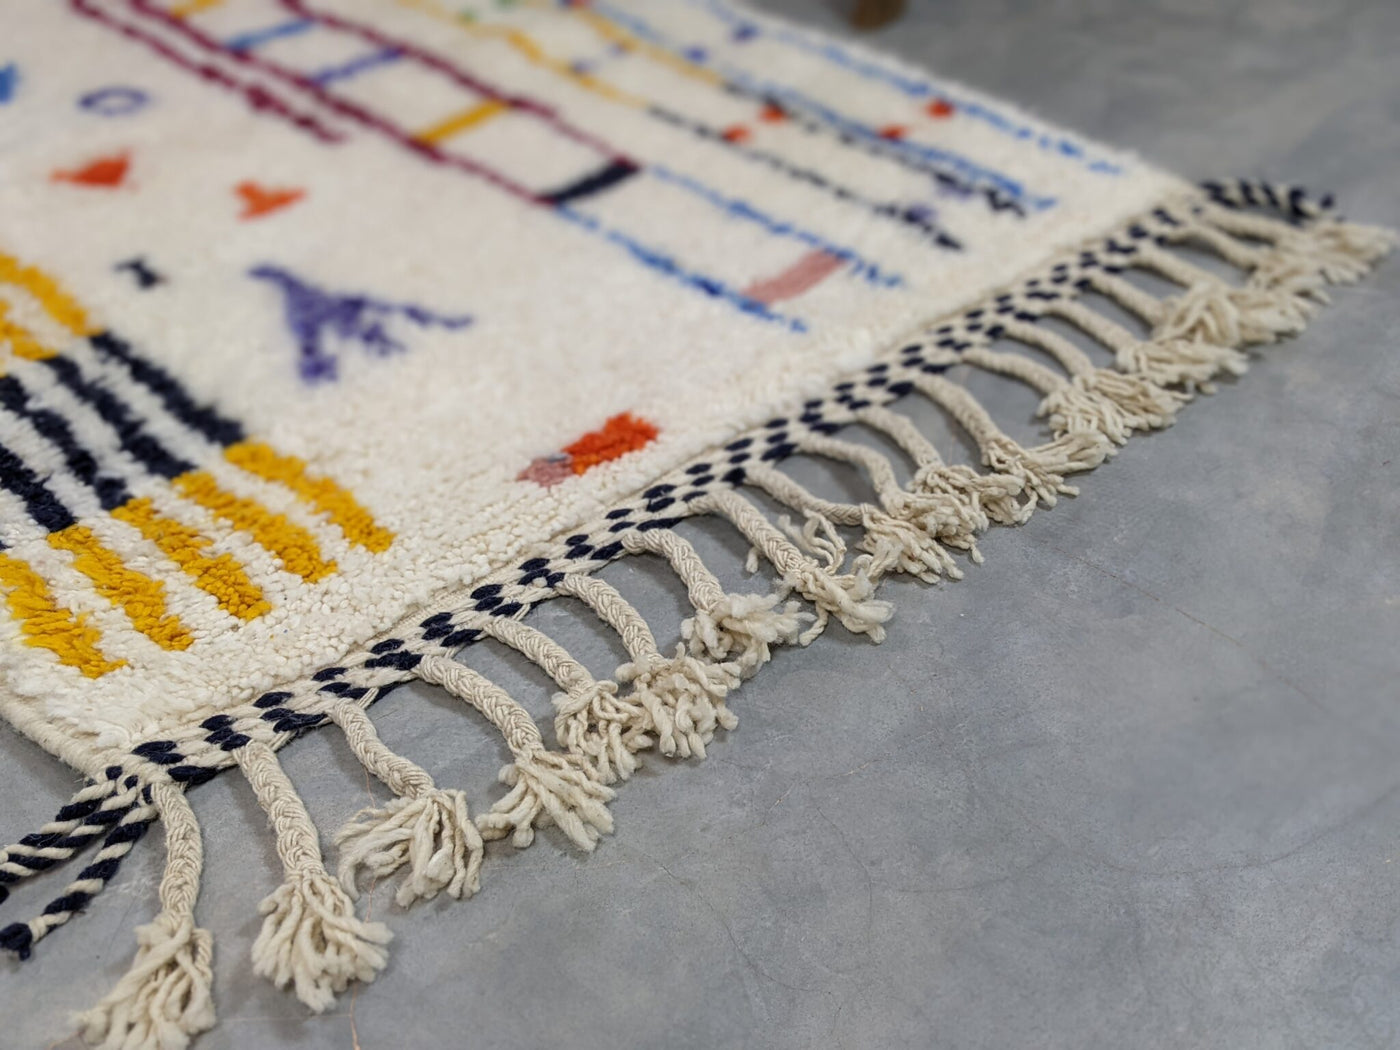 Small Moroccan Rugs - Berber Handwoven Rugs for Home Décor (155 x 104 cm)